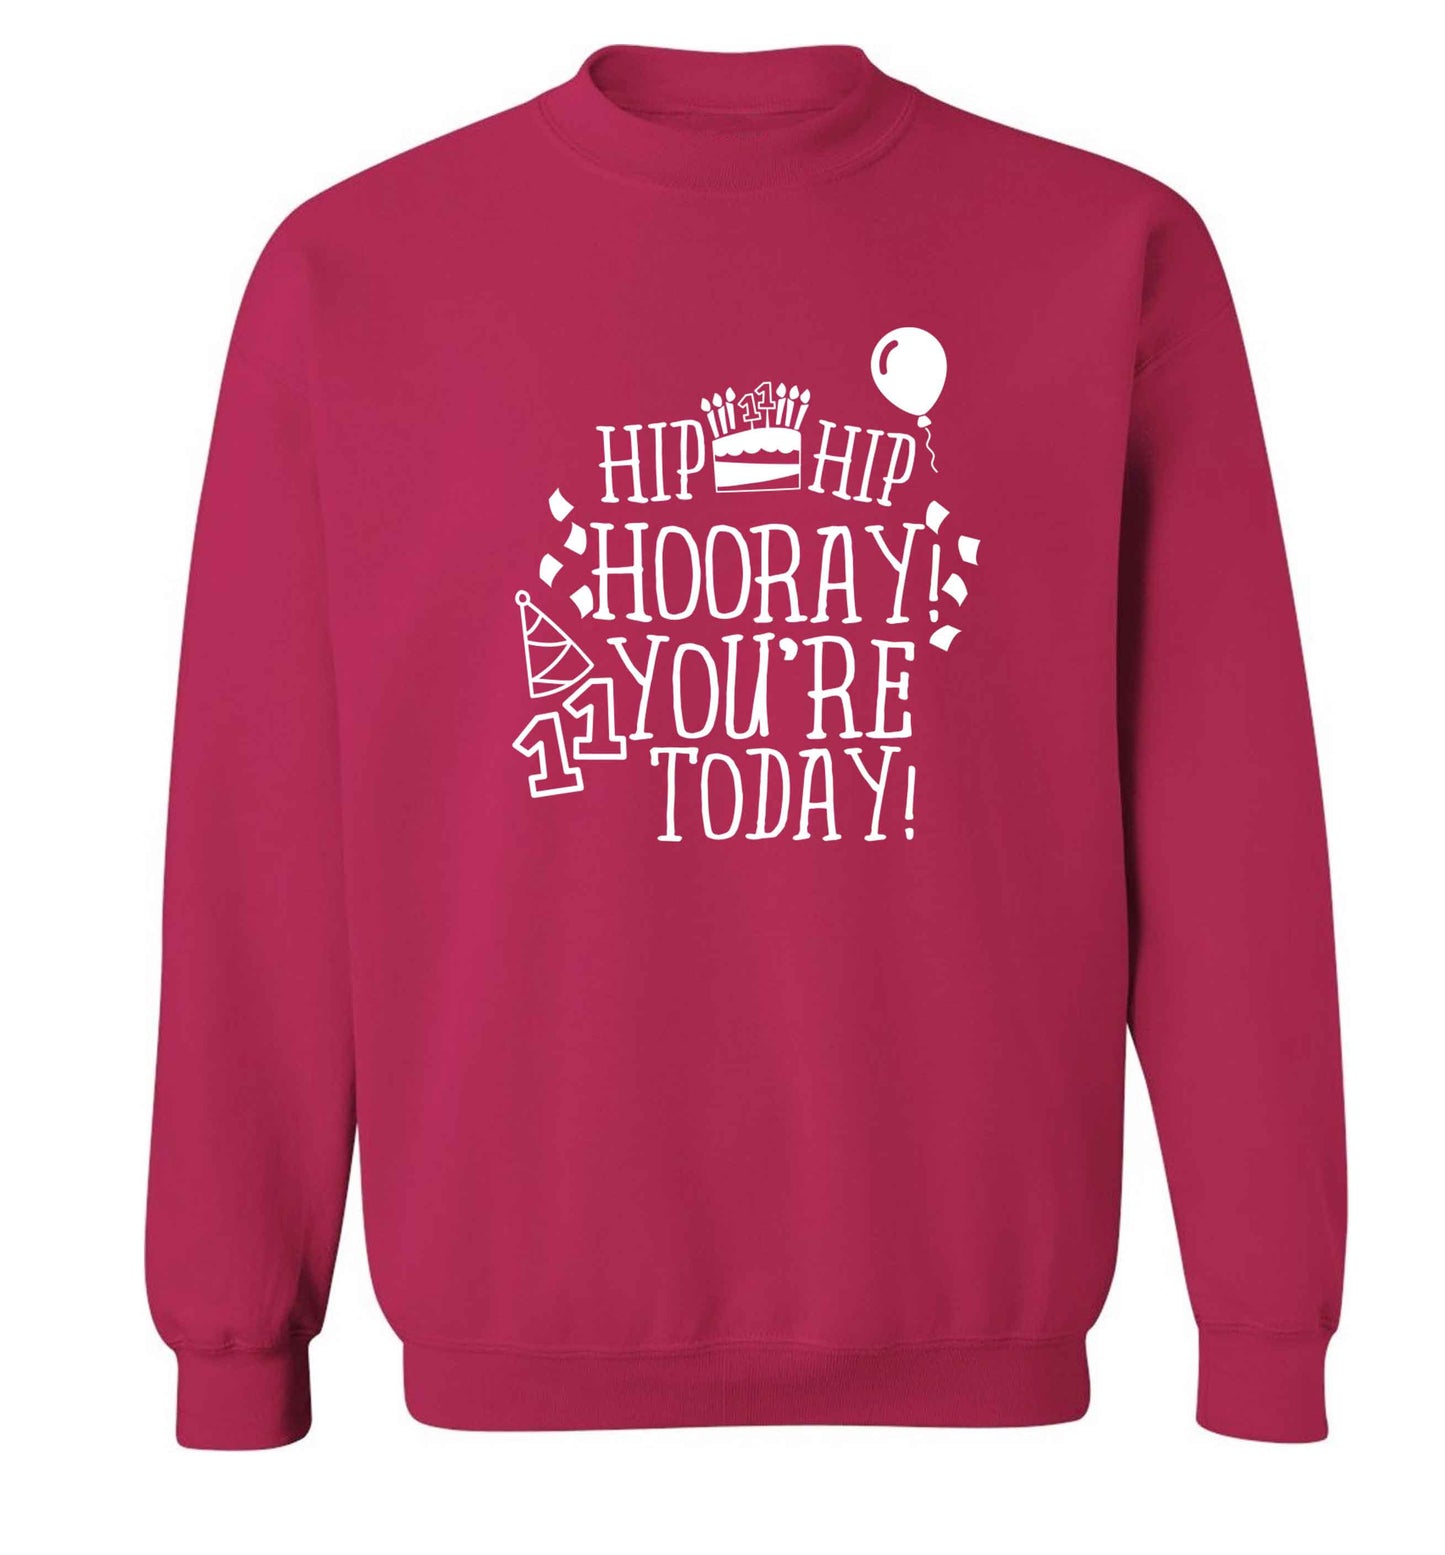 Hip hip hooray I you're eleven today! adult's unisex pink sweater 2XL